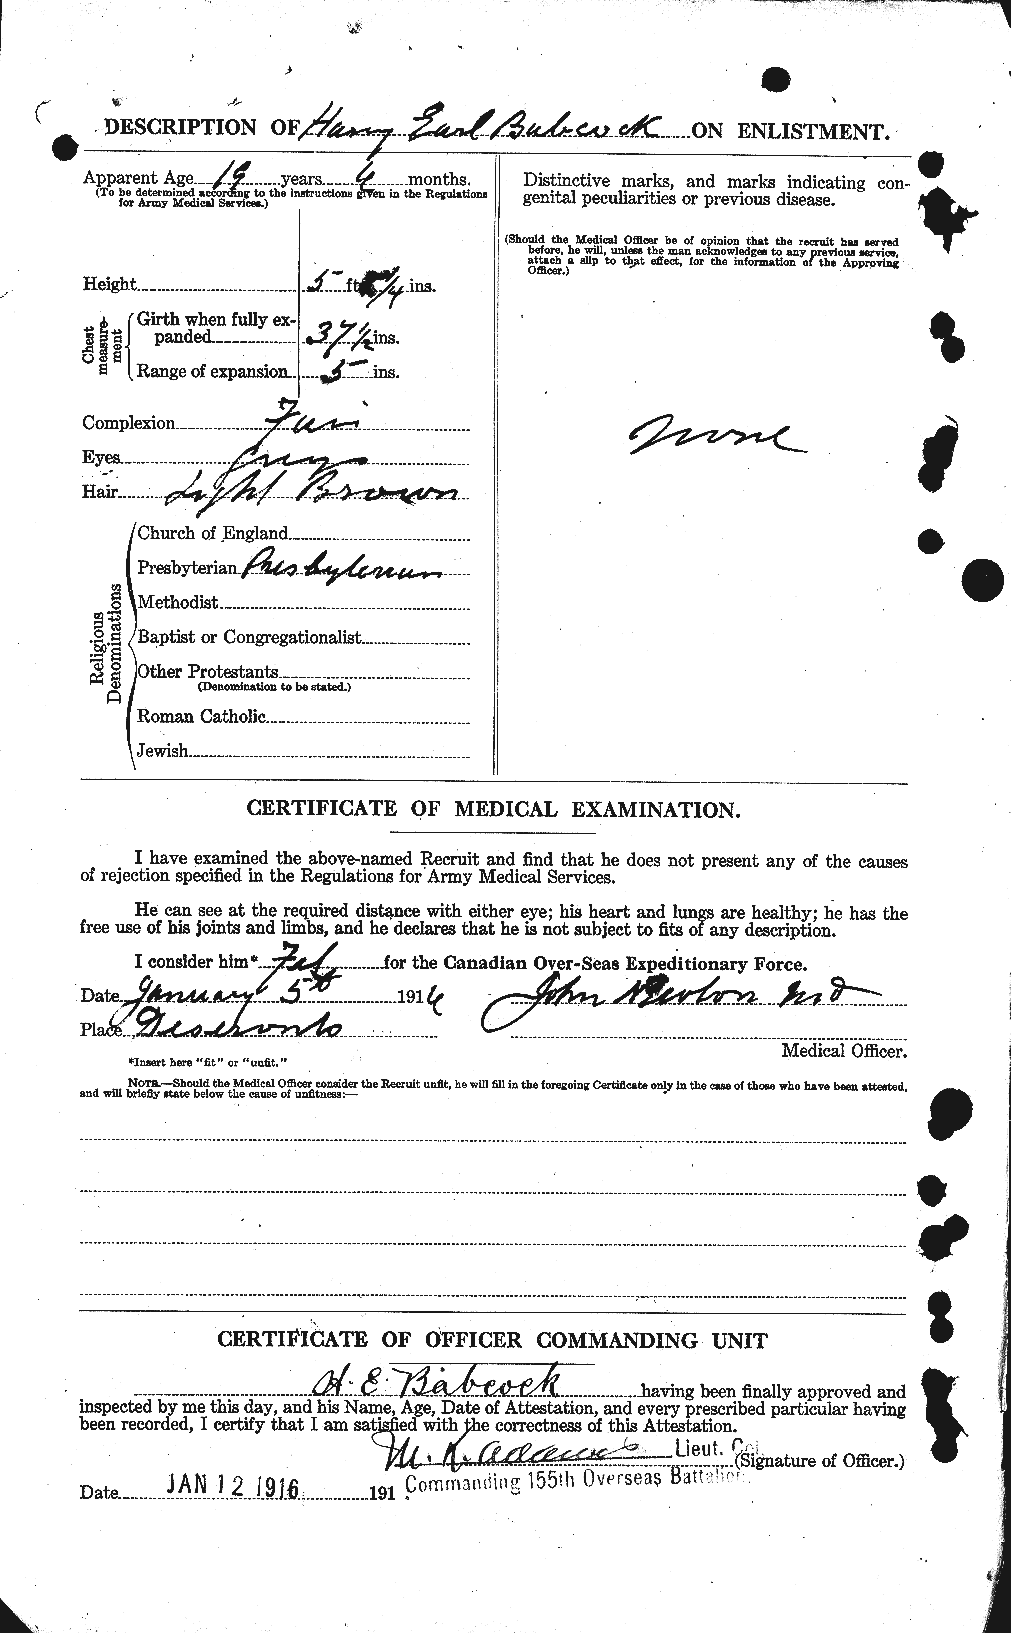 Personnel Records of the First World War - CEF 218238b